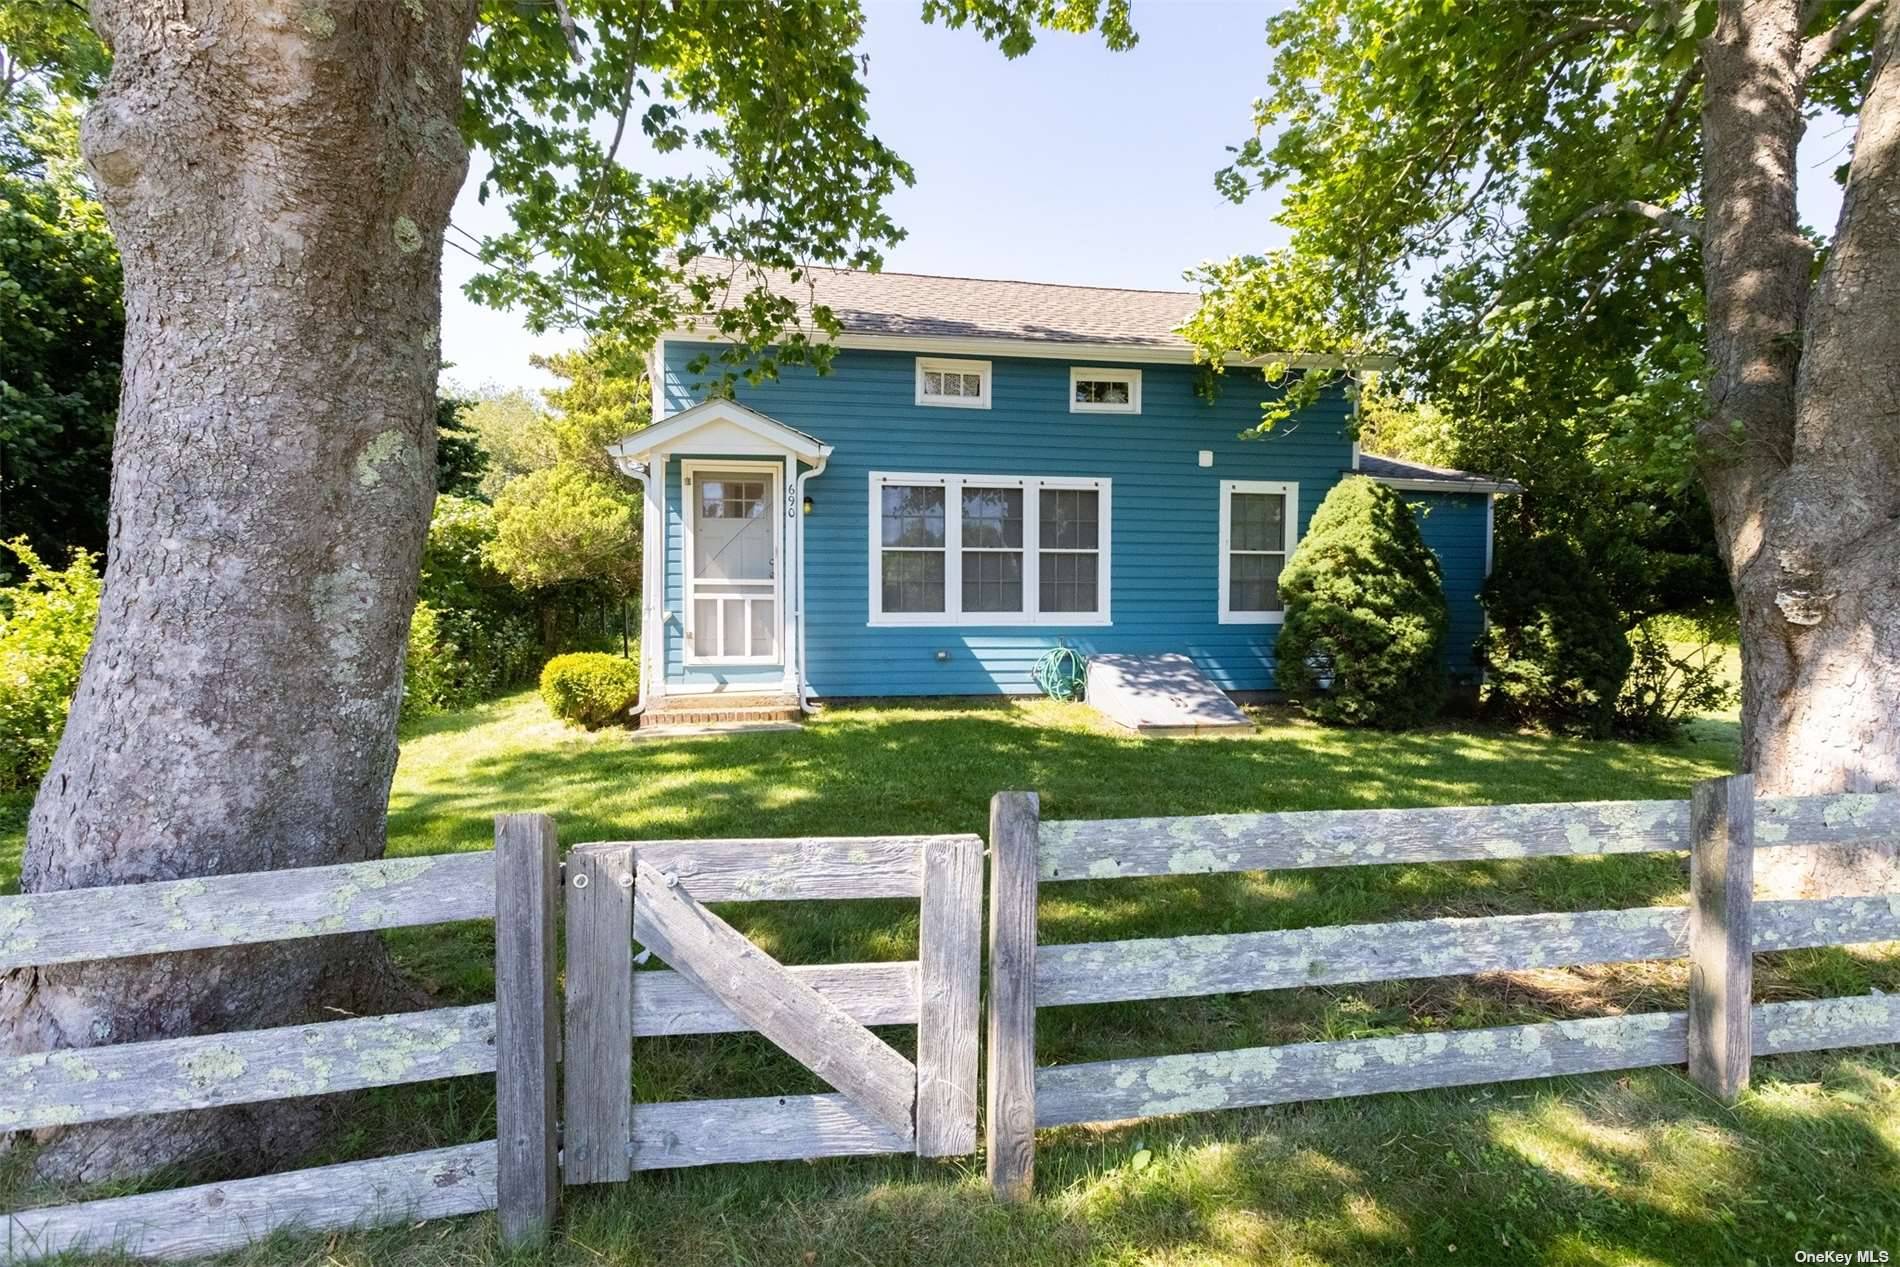 1930 Vintage Saltbox home offers a blend of modern touches with old world charm.